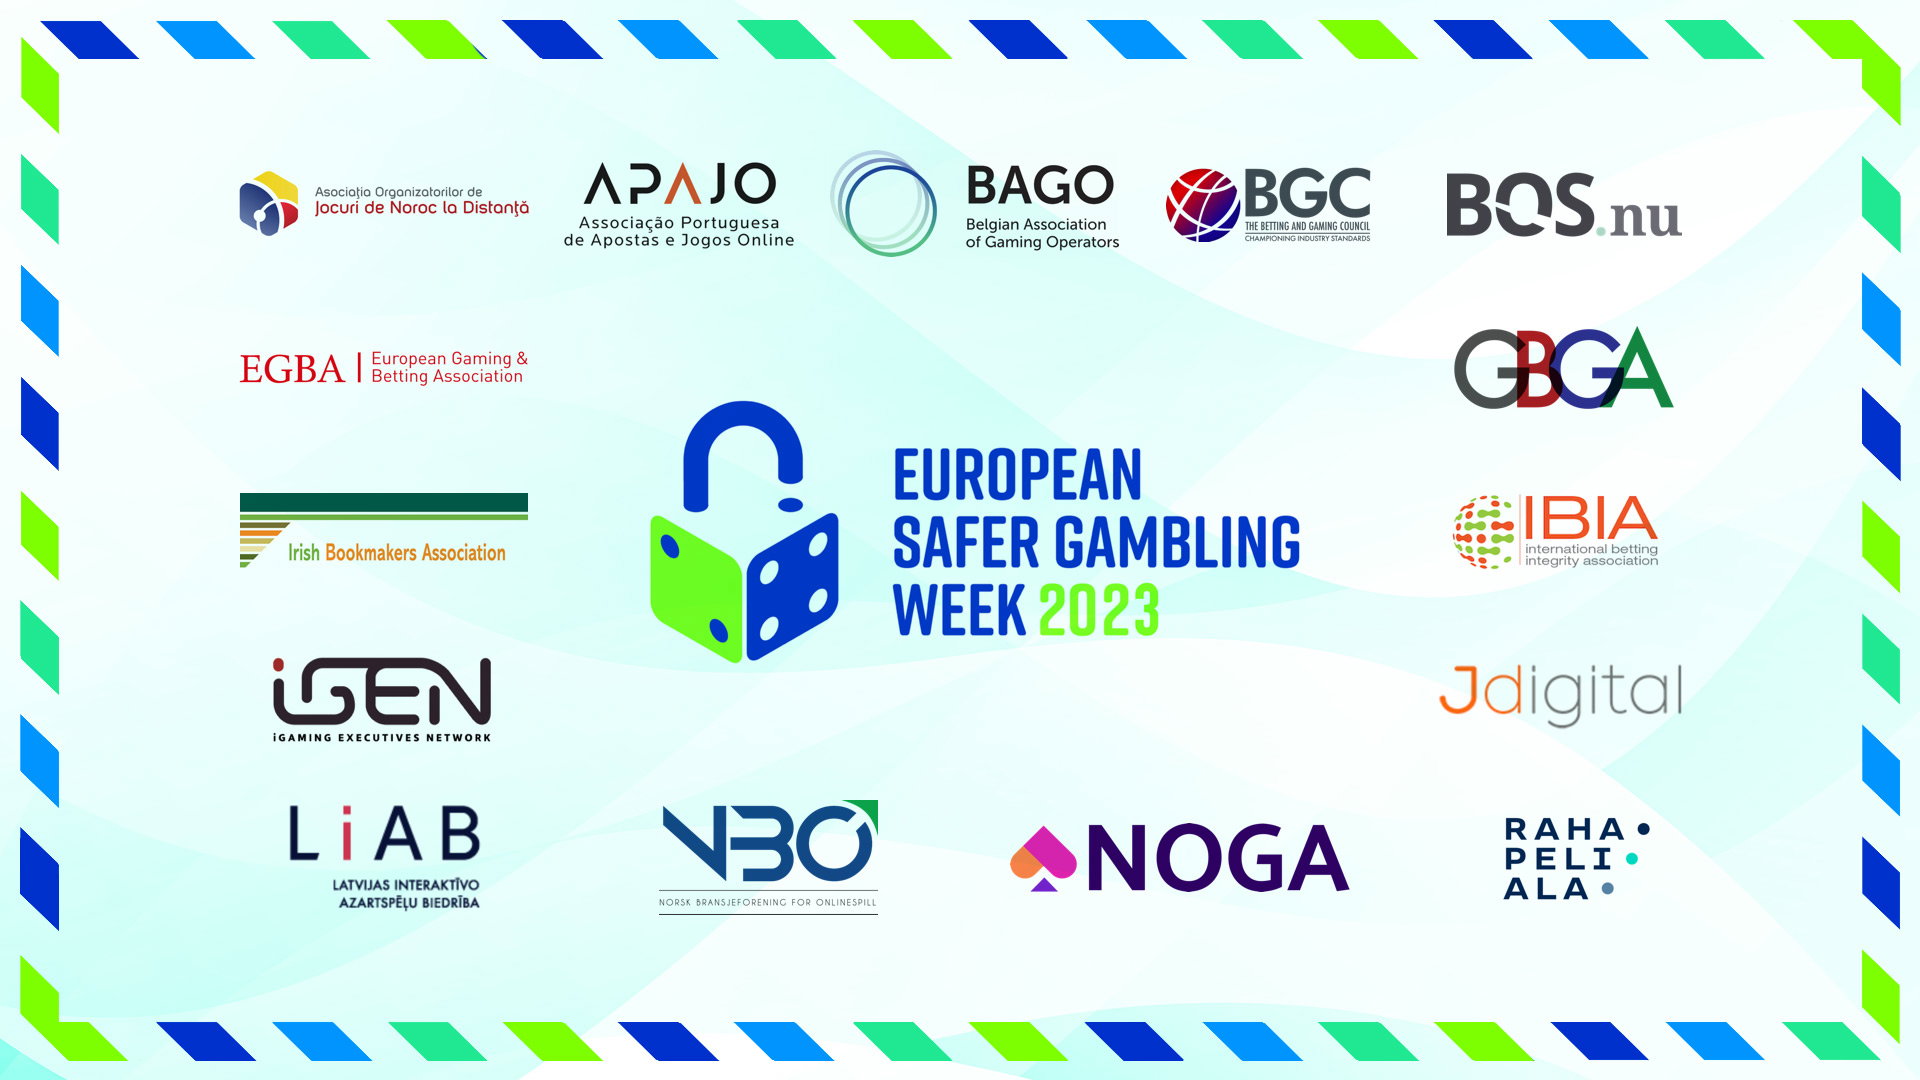 EGBA – European Gaming and Betting Association